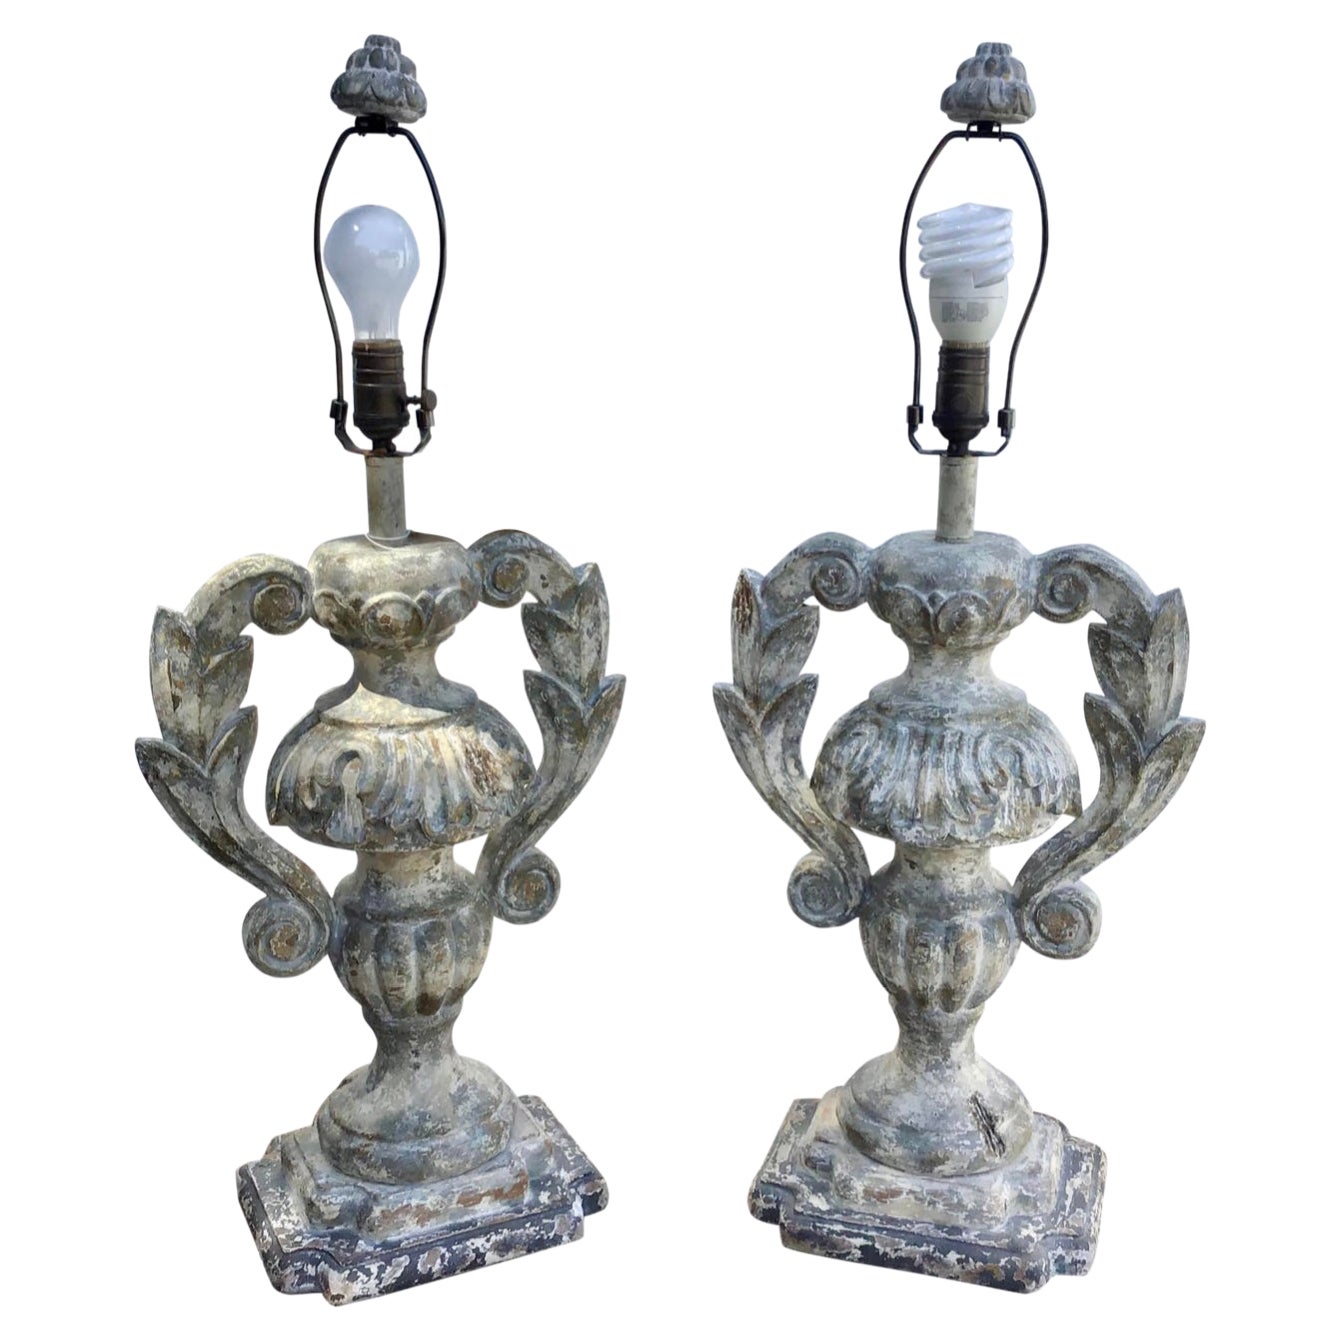 Carved Distressed Wood Italian Urn Table Lamps